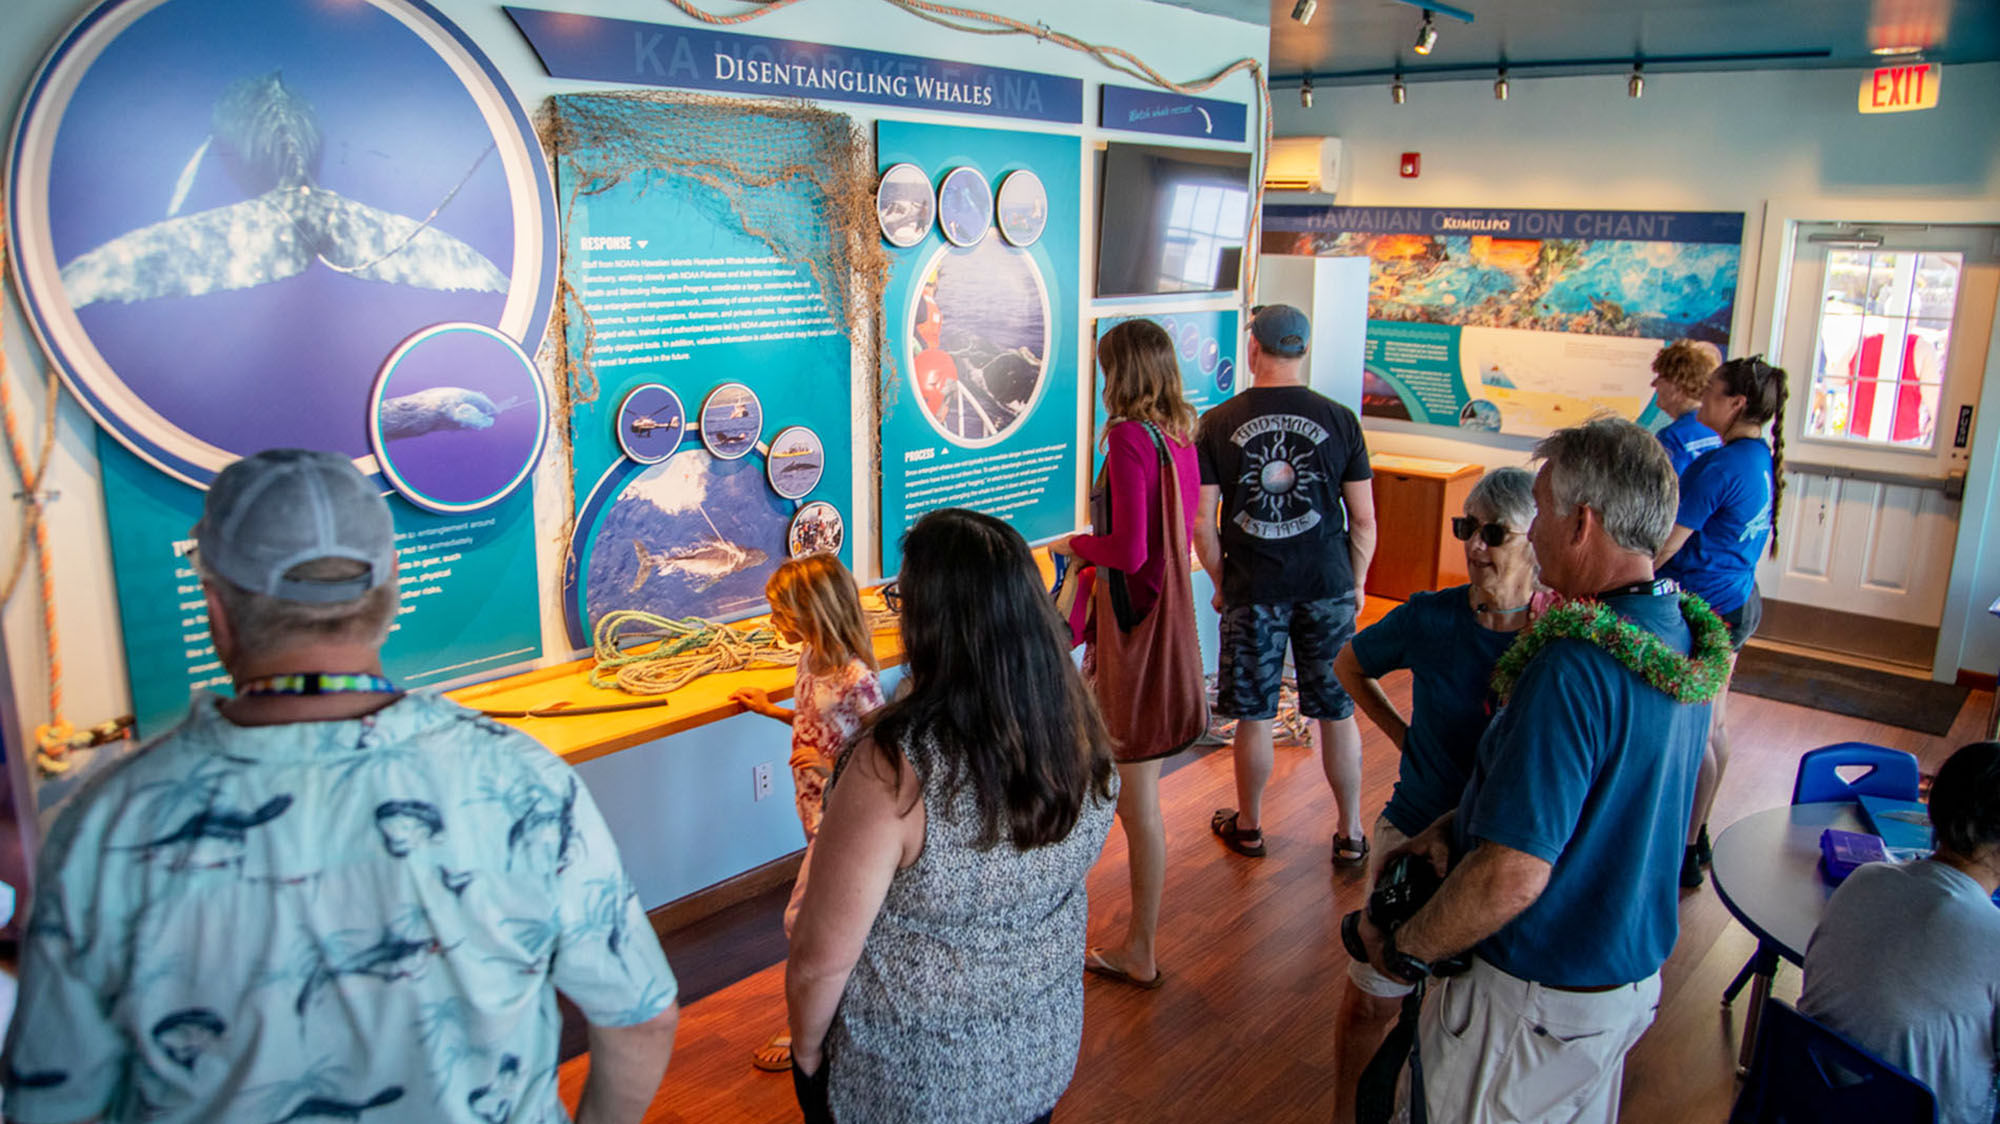 A display on disentangling whales at the Sanctuary's renovated visit center.